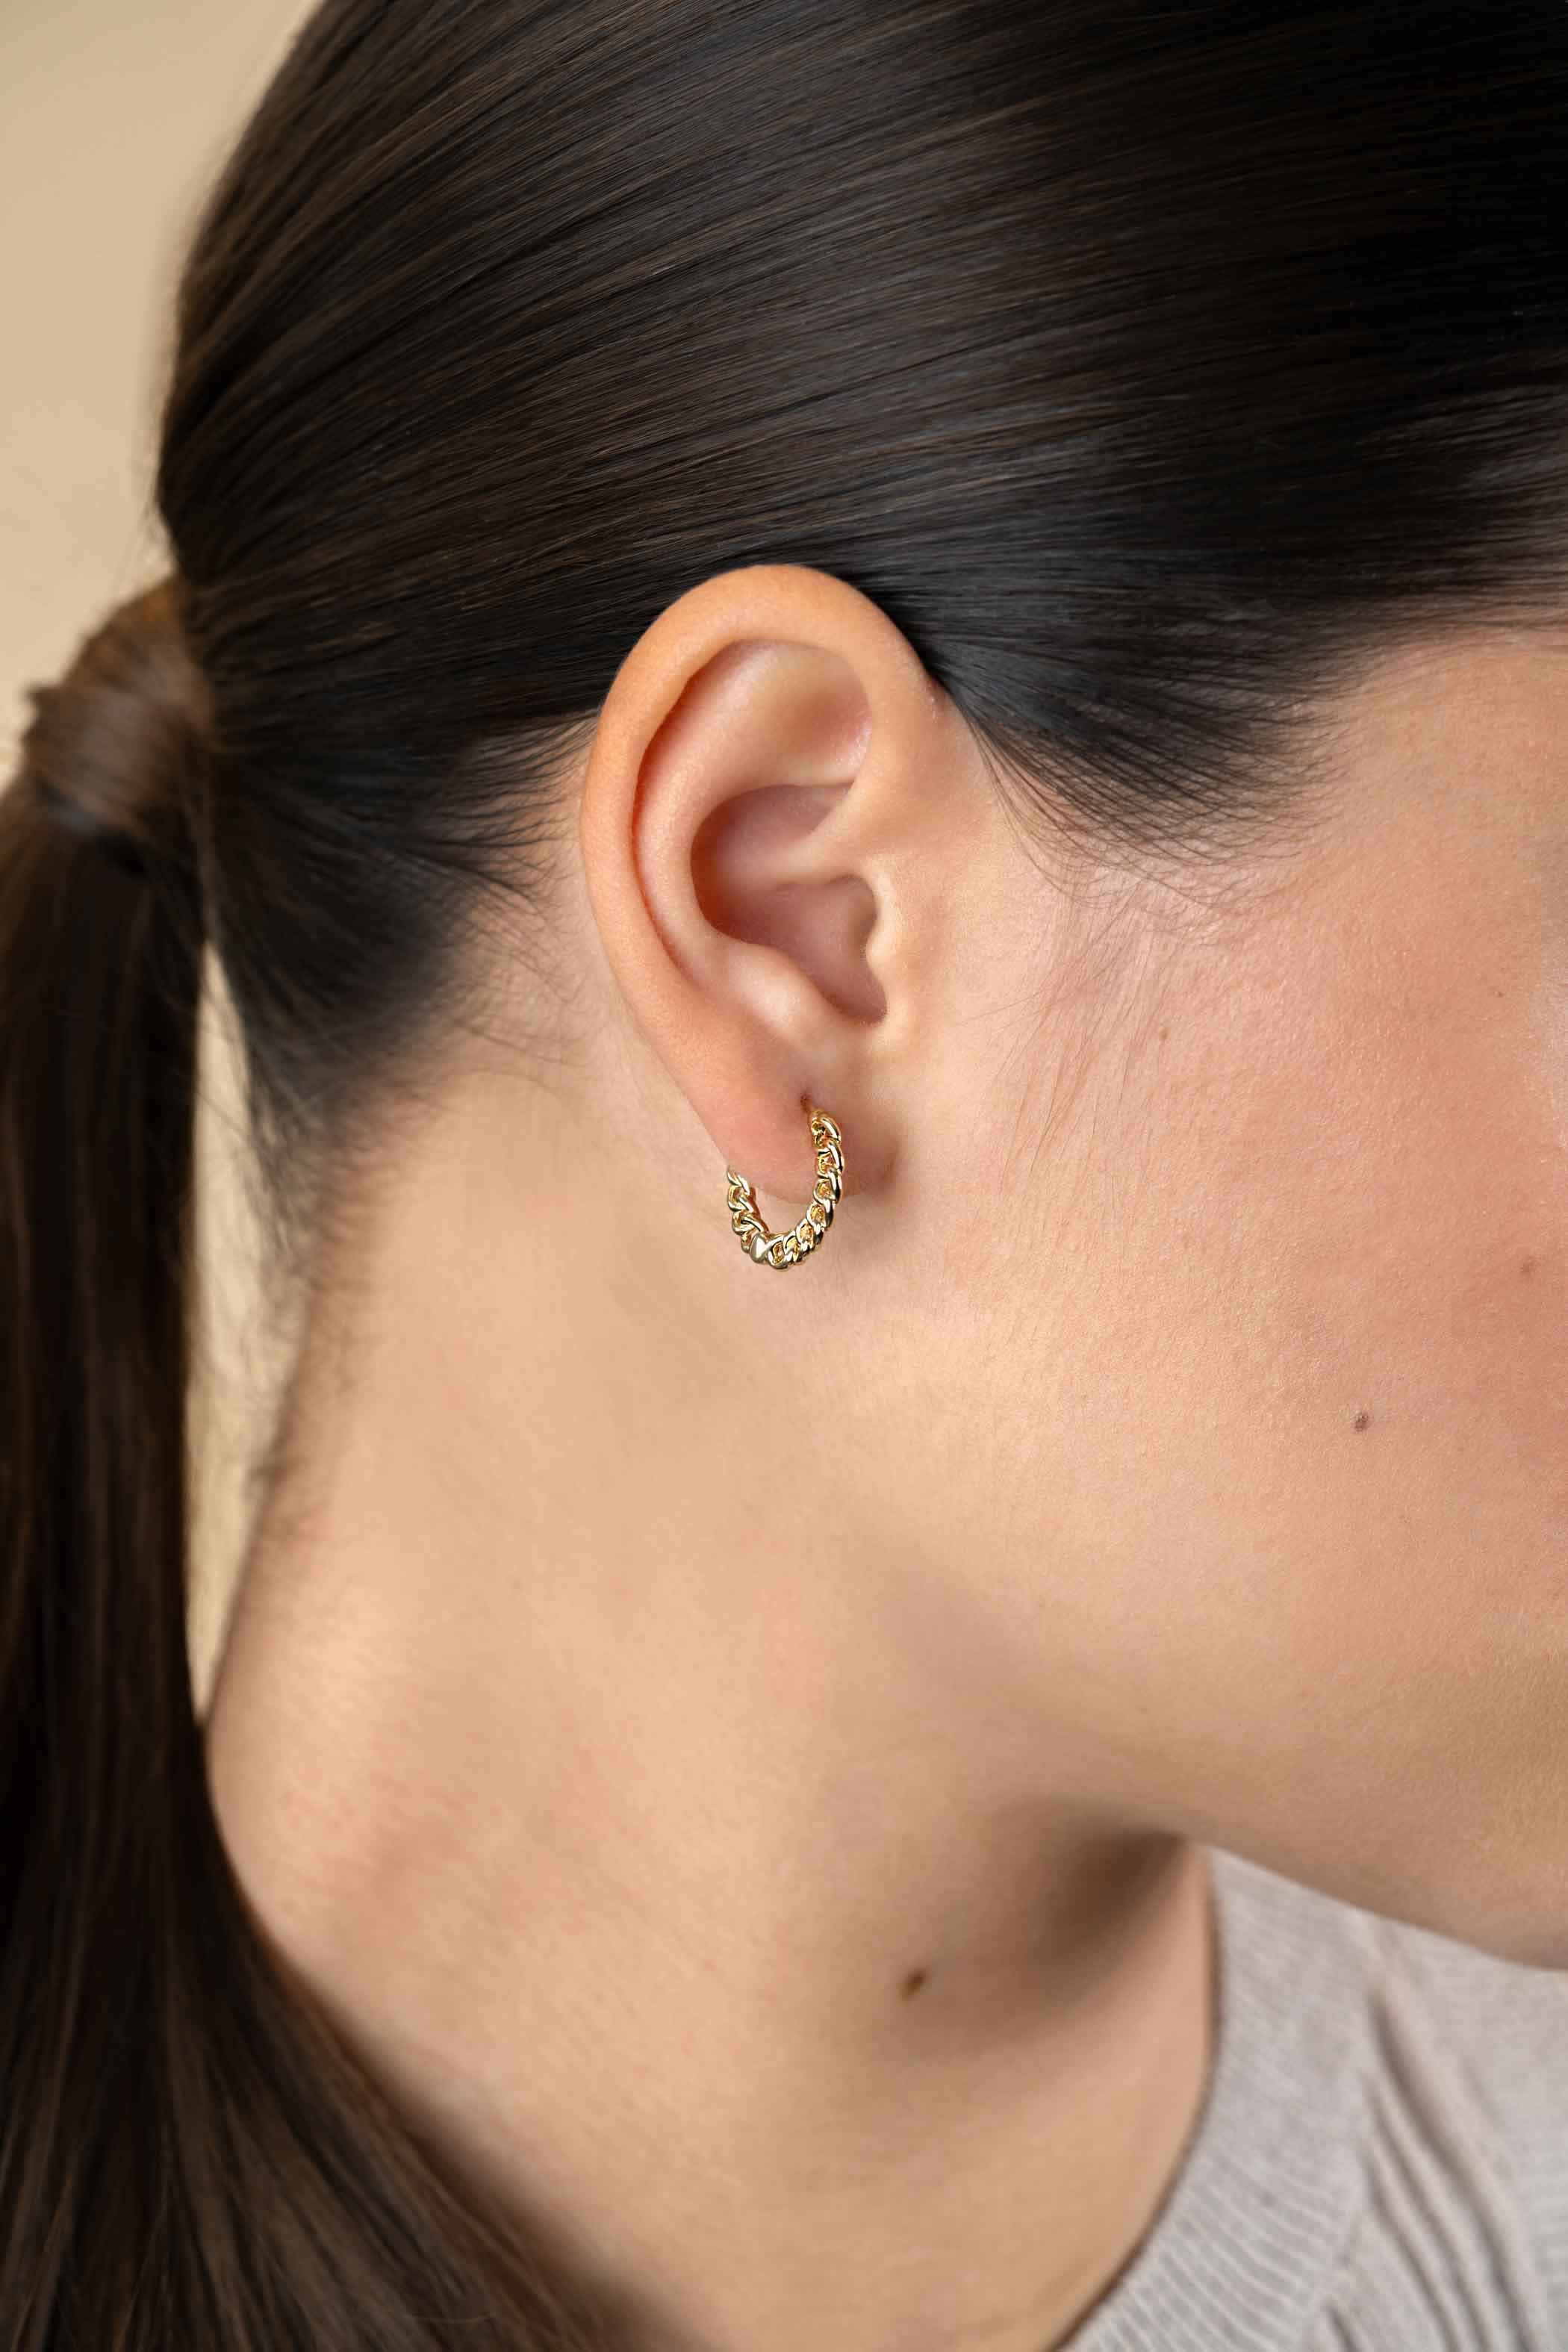 17mm ZINZI Gold Plated Sterling Silver Hoop Earrings Curb Chain from the side width 2mm ZIO1414G